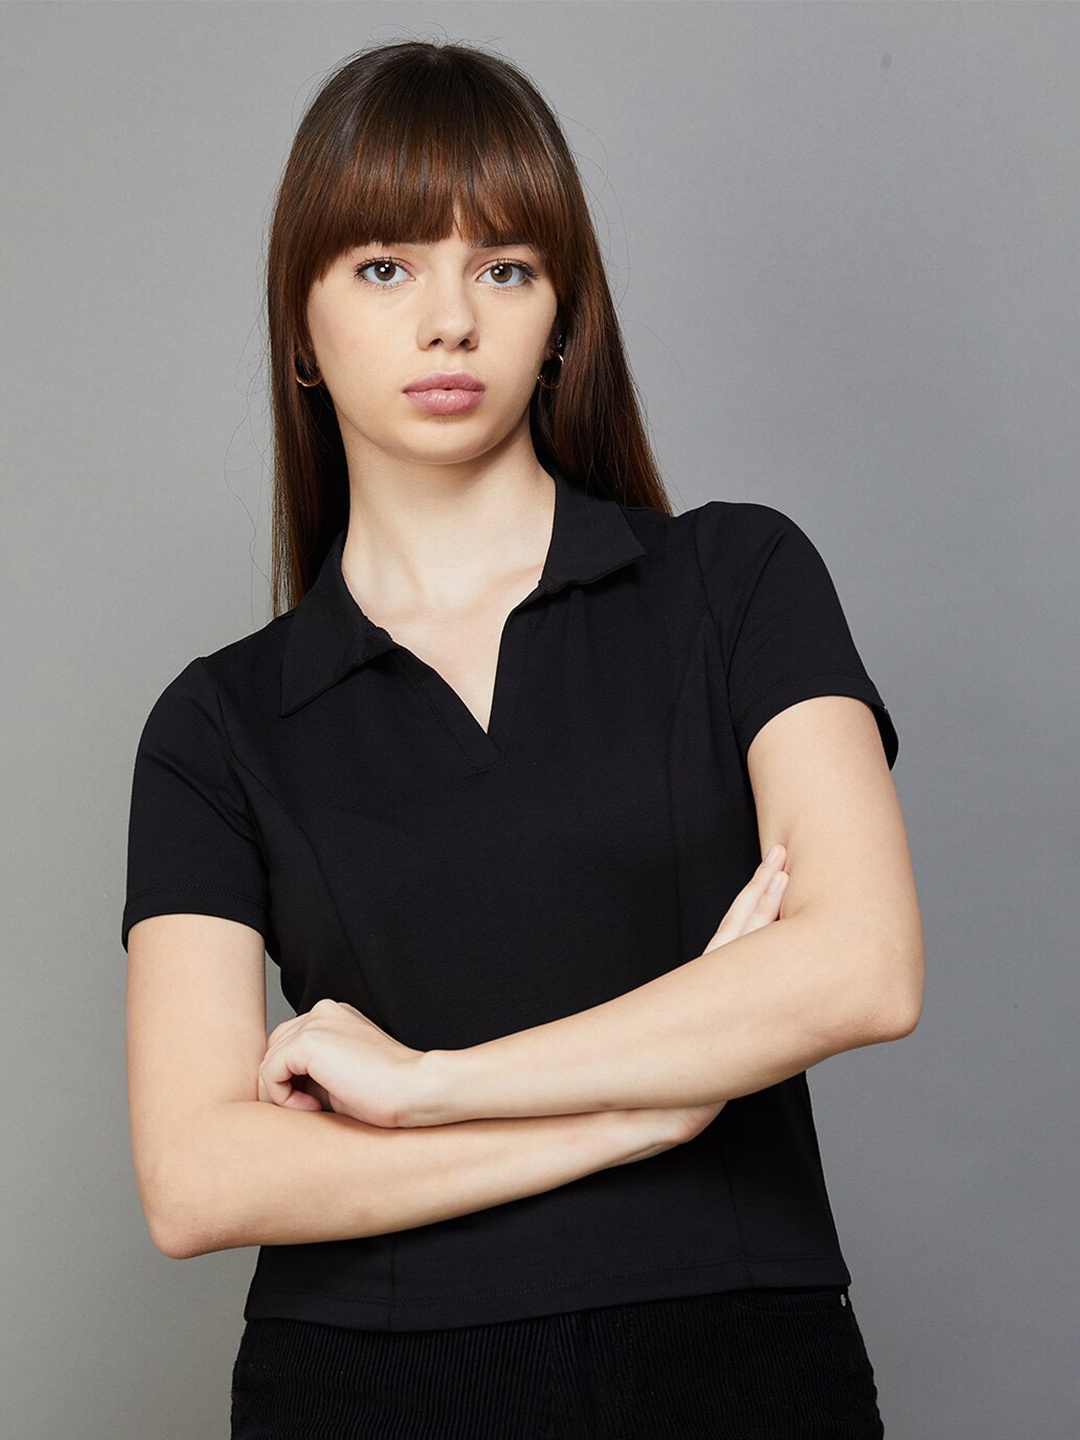 

Ginger by Lifestyle Shirt Collar Short Sleeves Cotton Shirt Style Top, Black